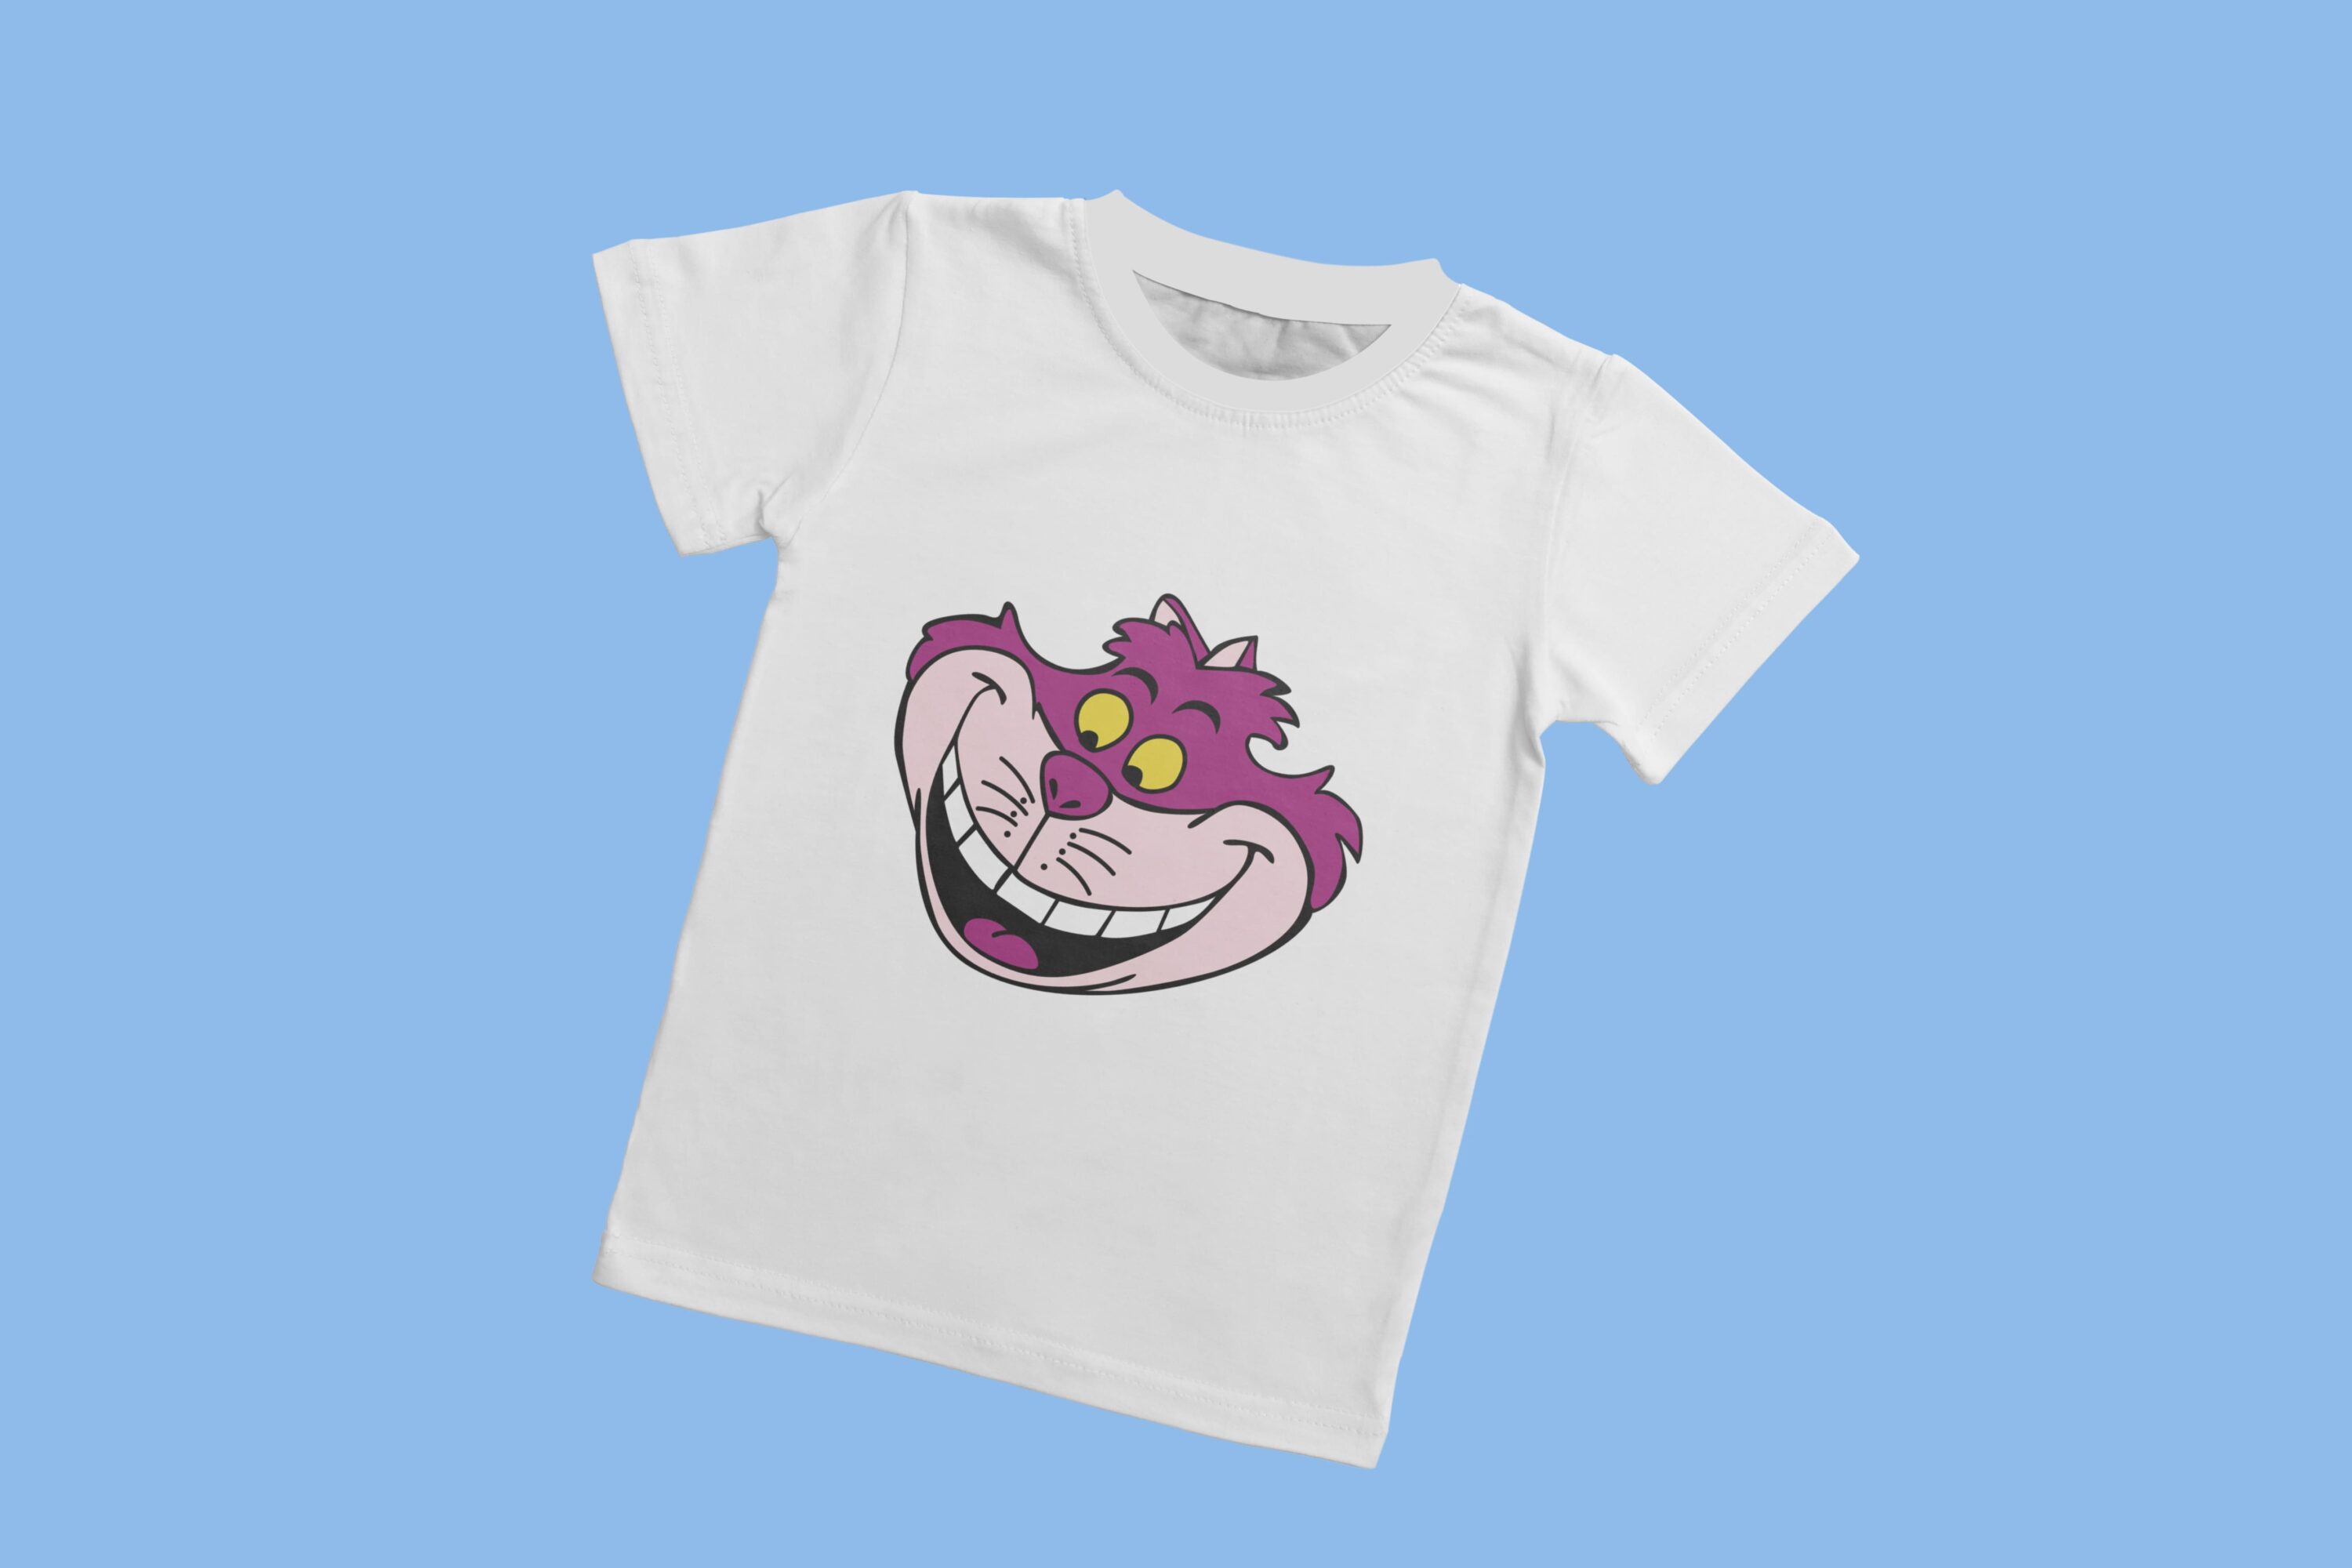 A white t-shirt with a white collar and the face of a Cheshire cat looking down, on a blue background.